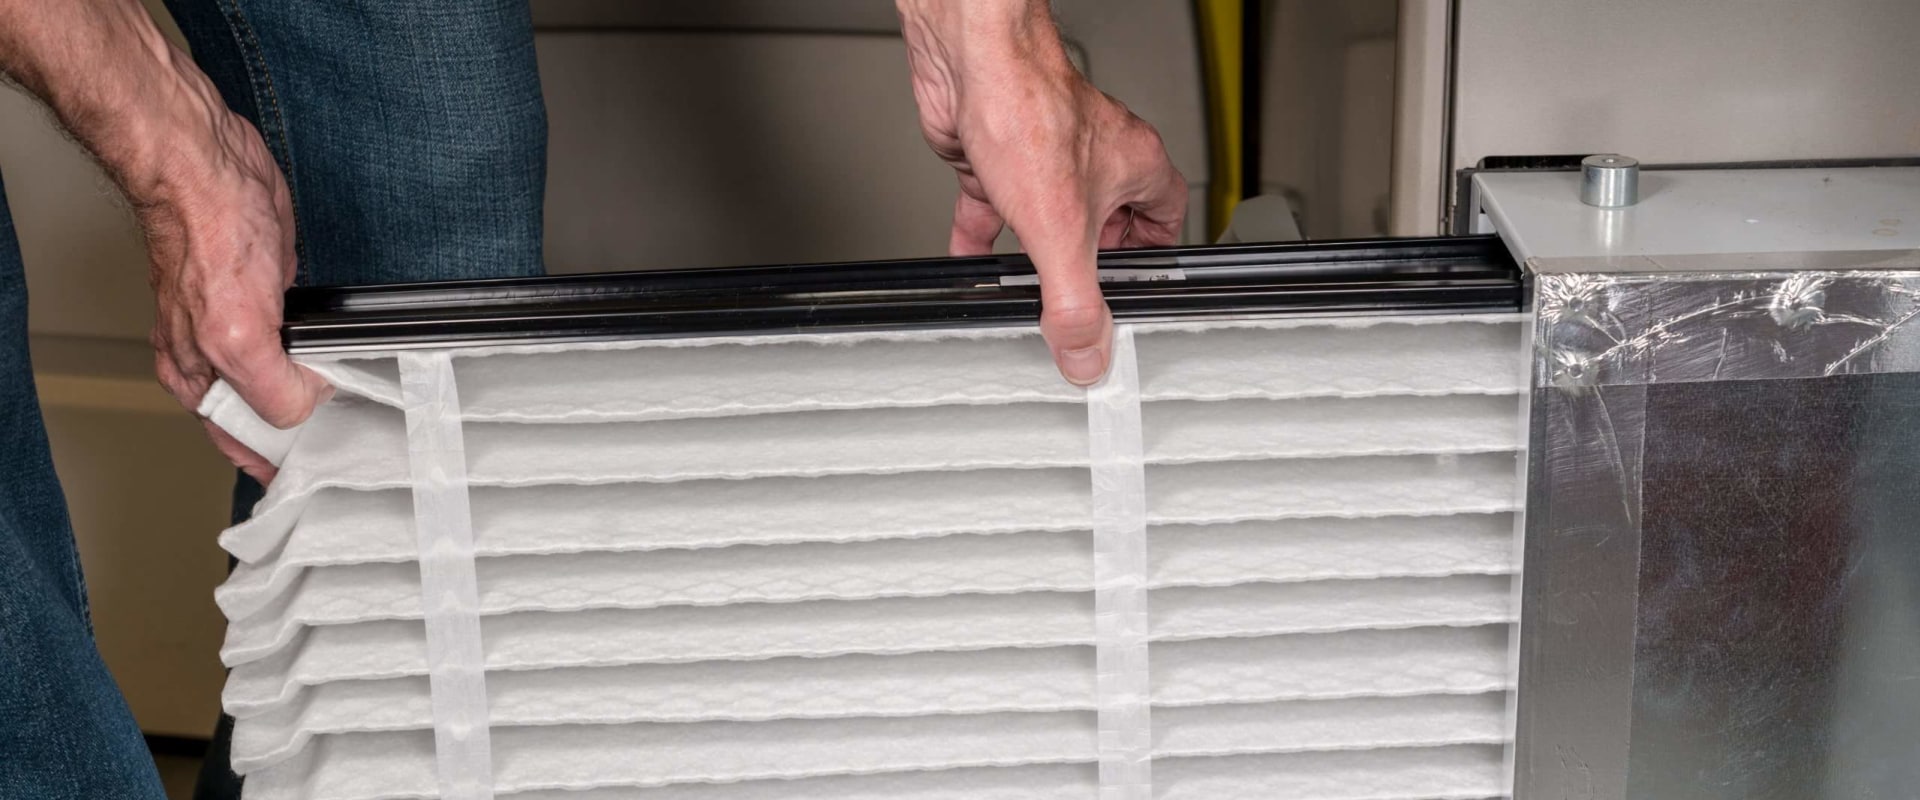 The Importance of Air Filters in HVAC Efficiency and Indoor Air Quality